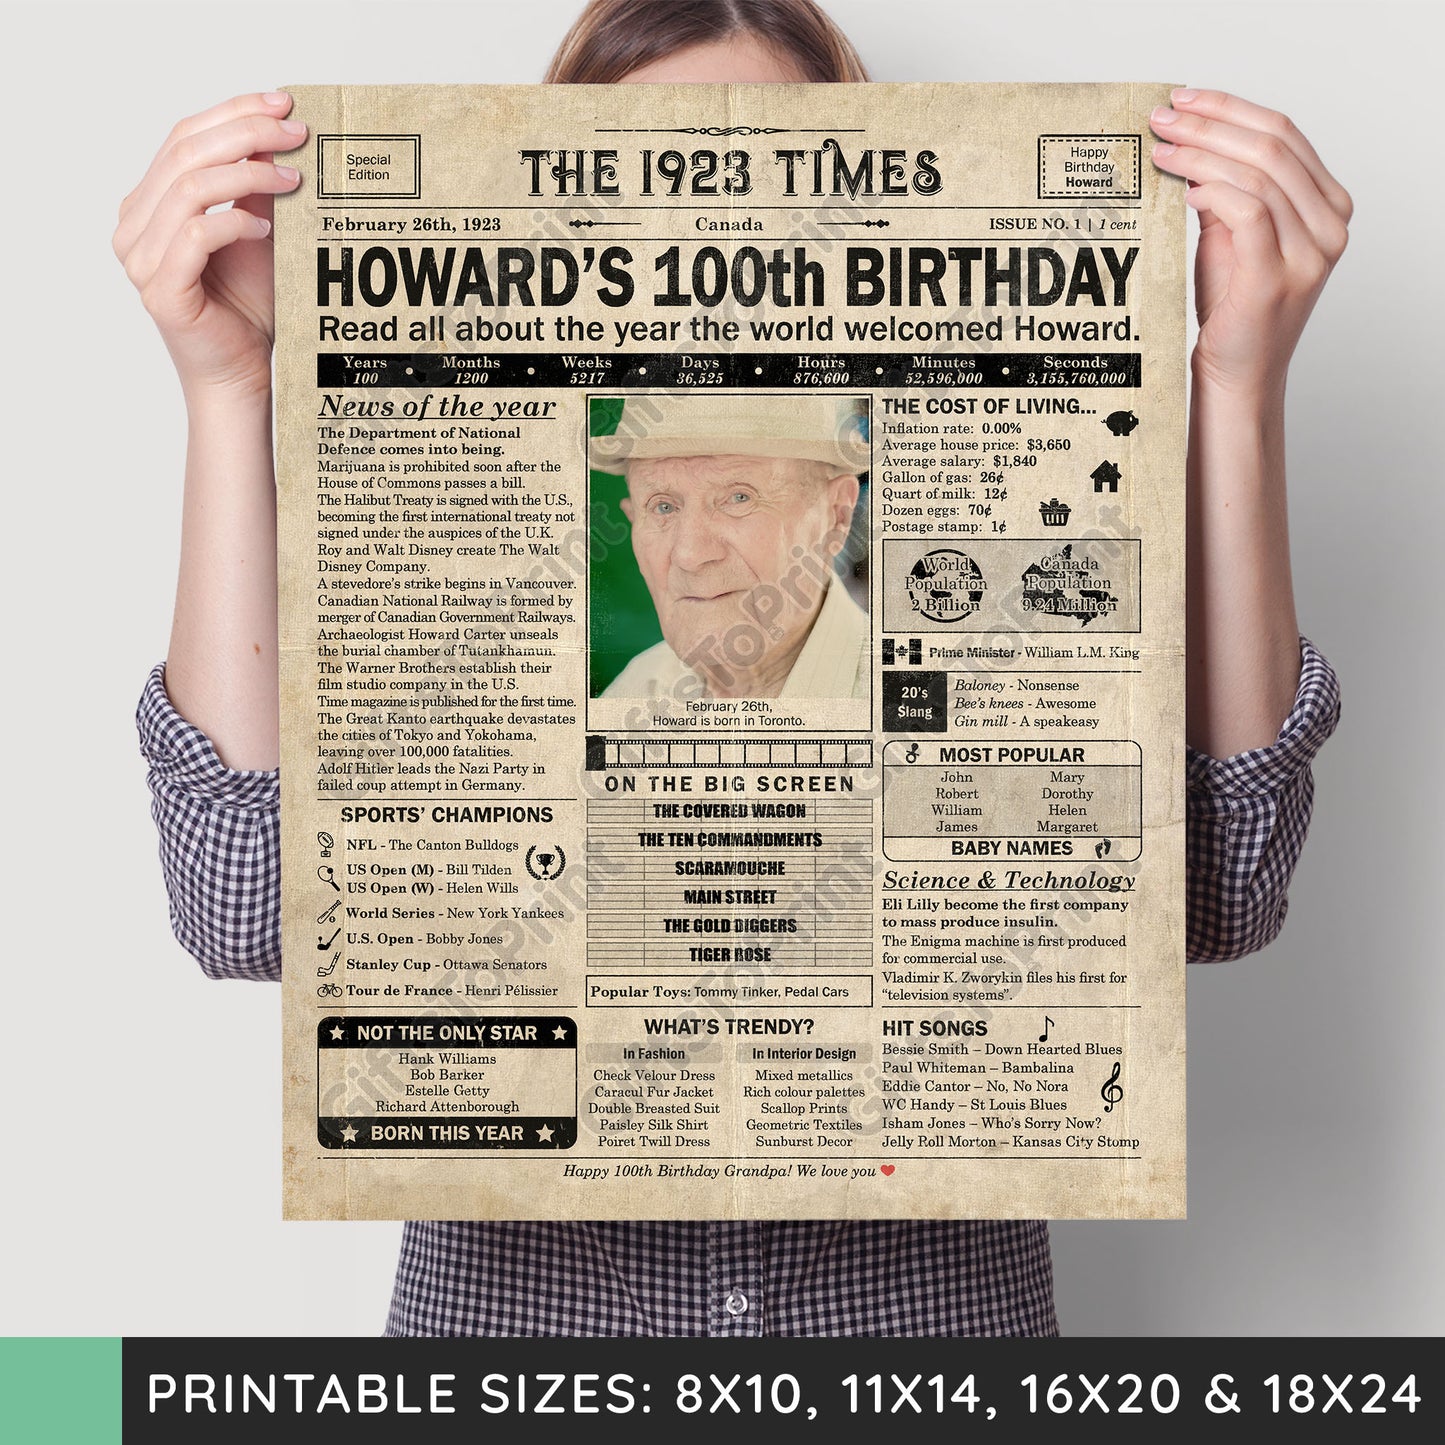 Personalized 100th Birthday Gift: A Printable CANADIAN Birthday Poster of 1923